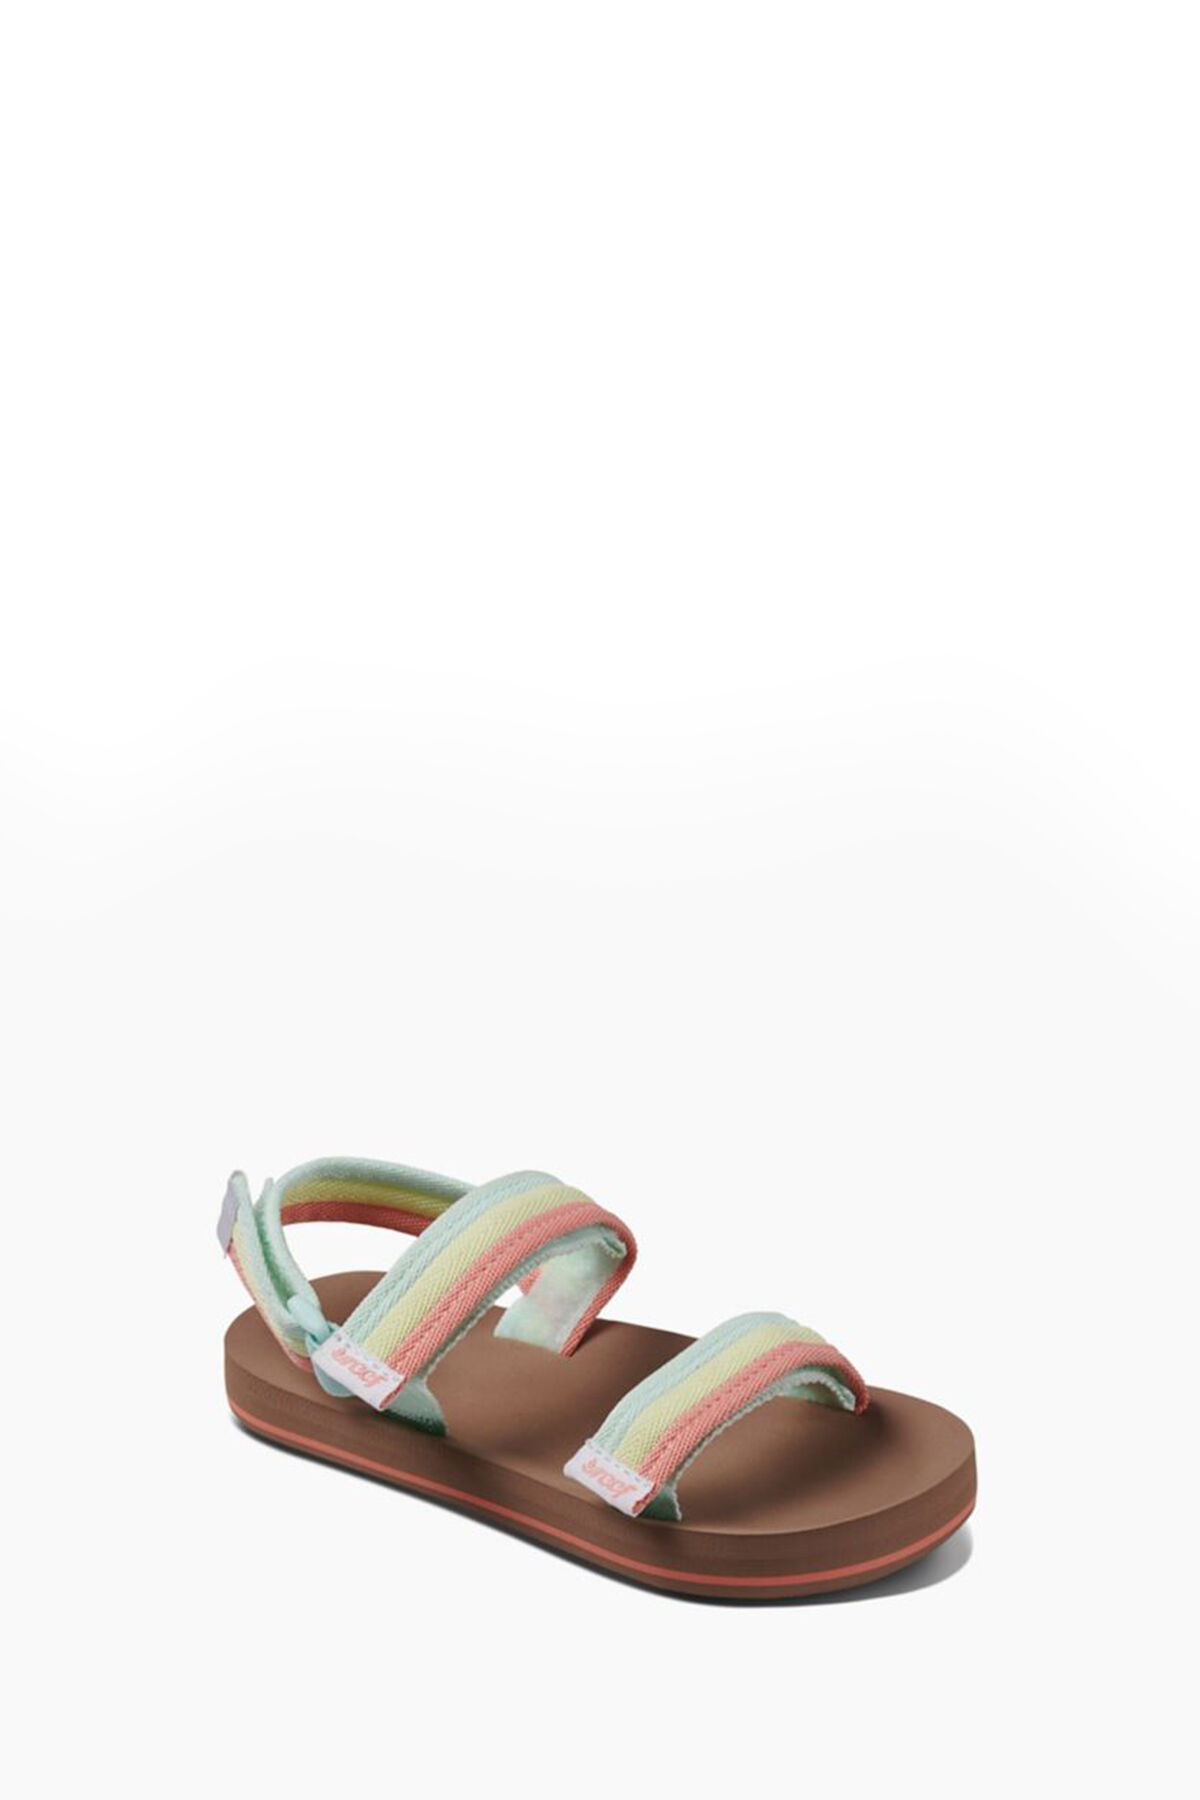 reef two strap sandals